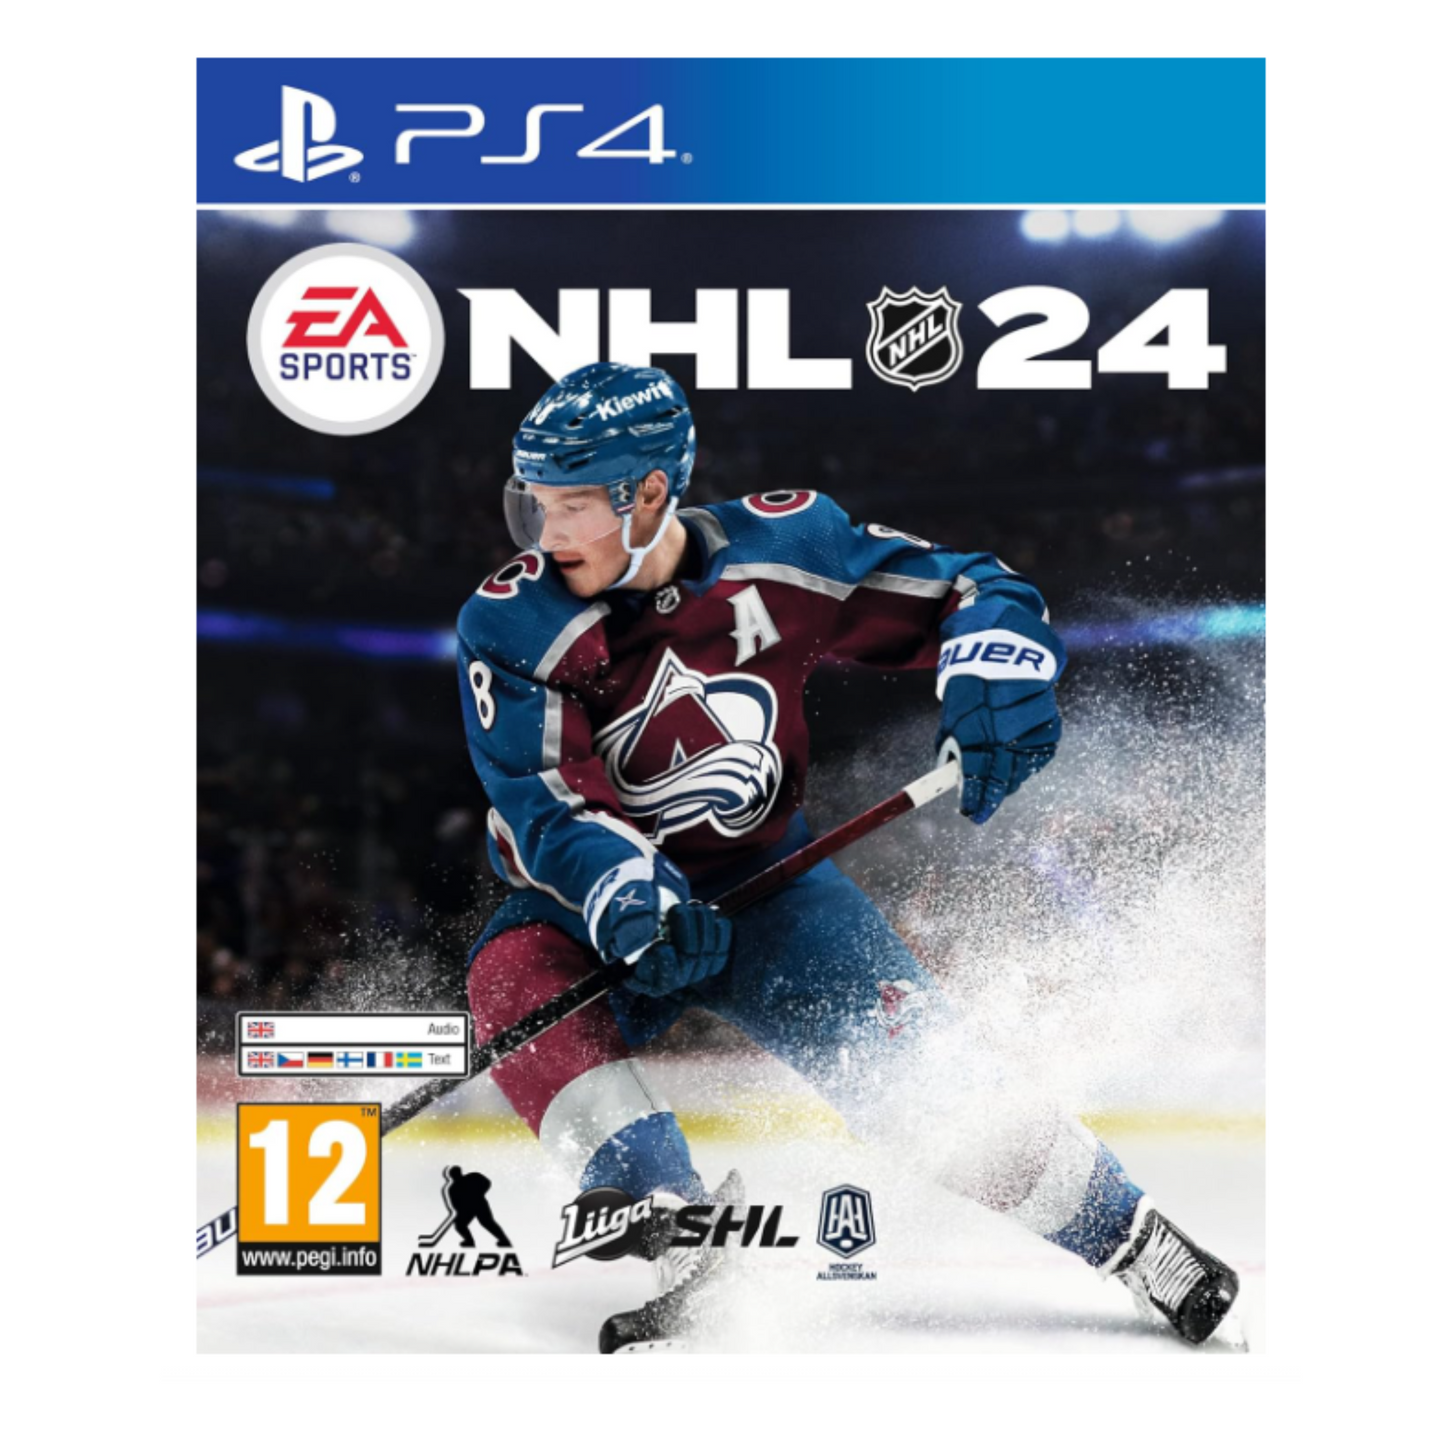 NHL 24 Video Game for Playstation 4